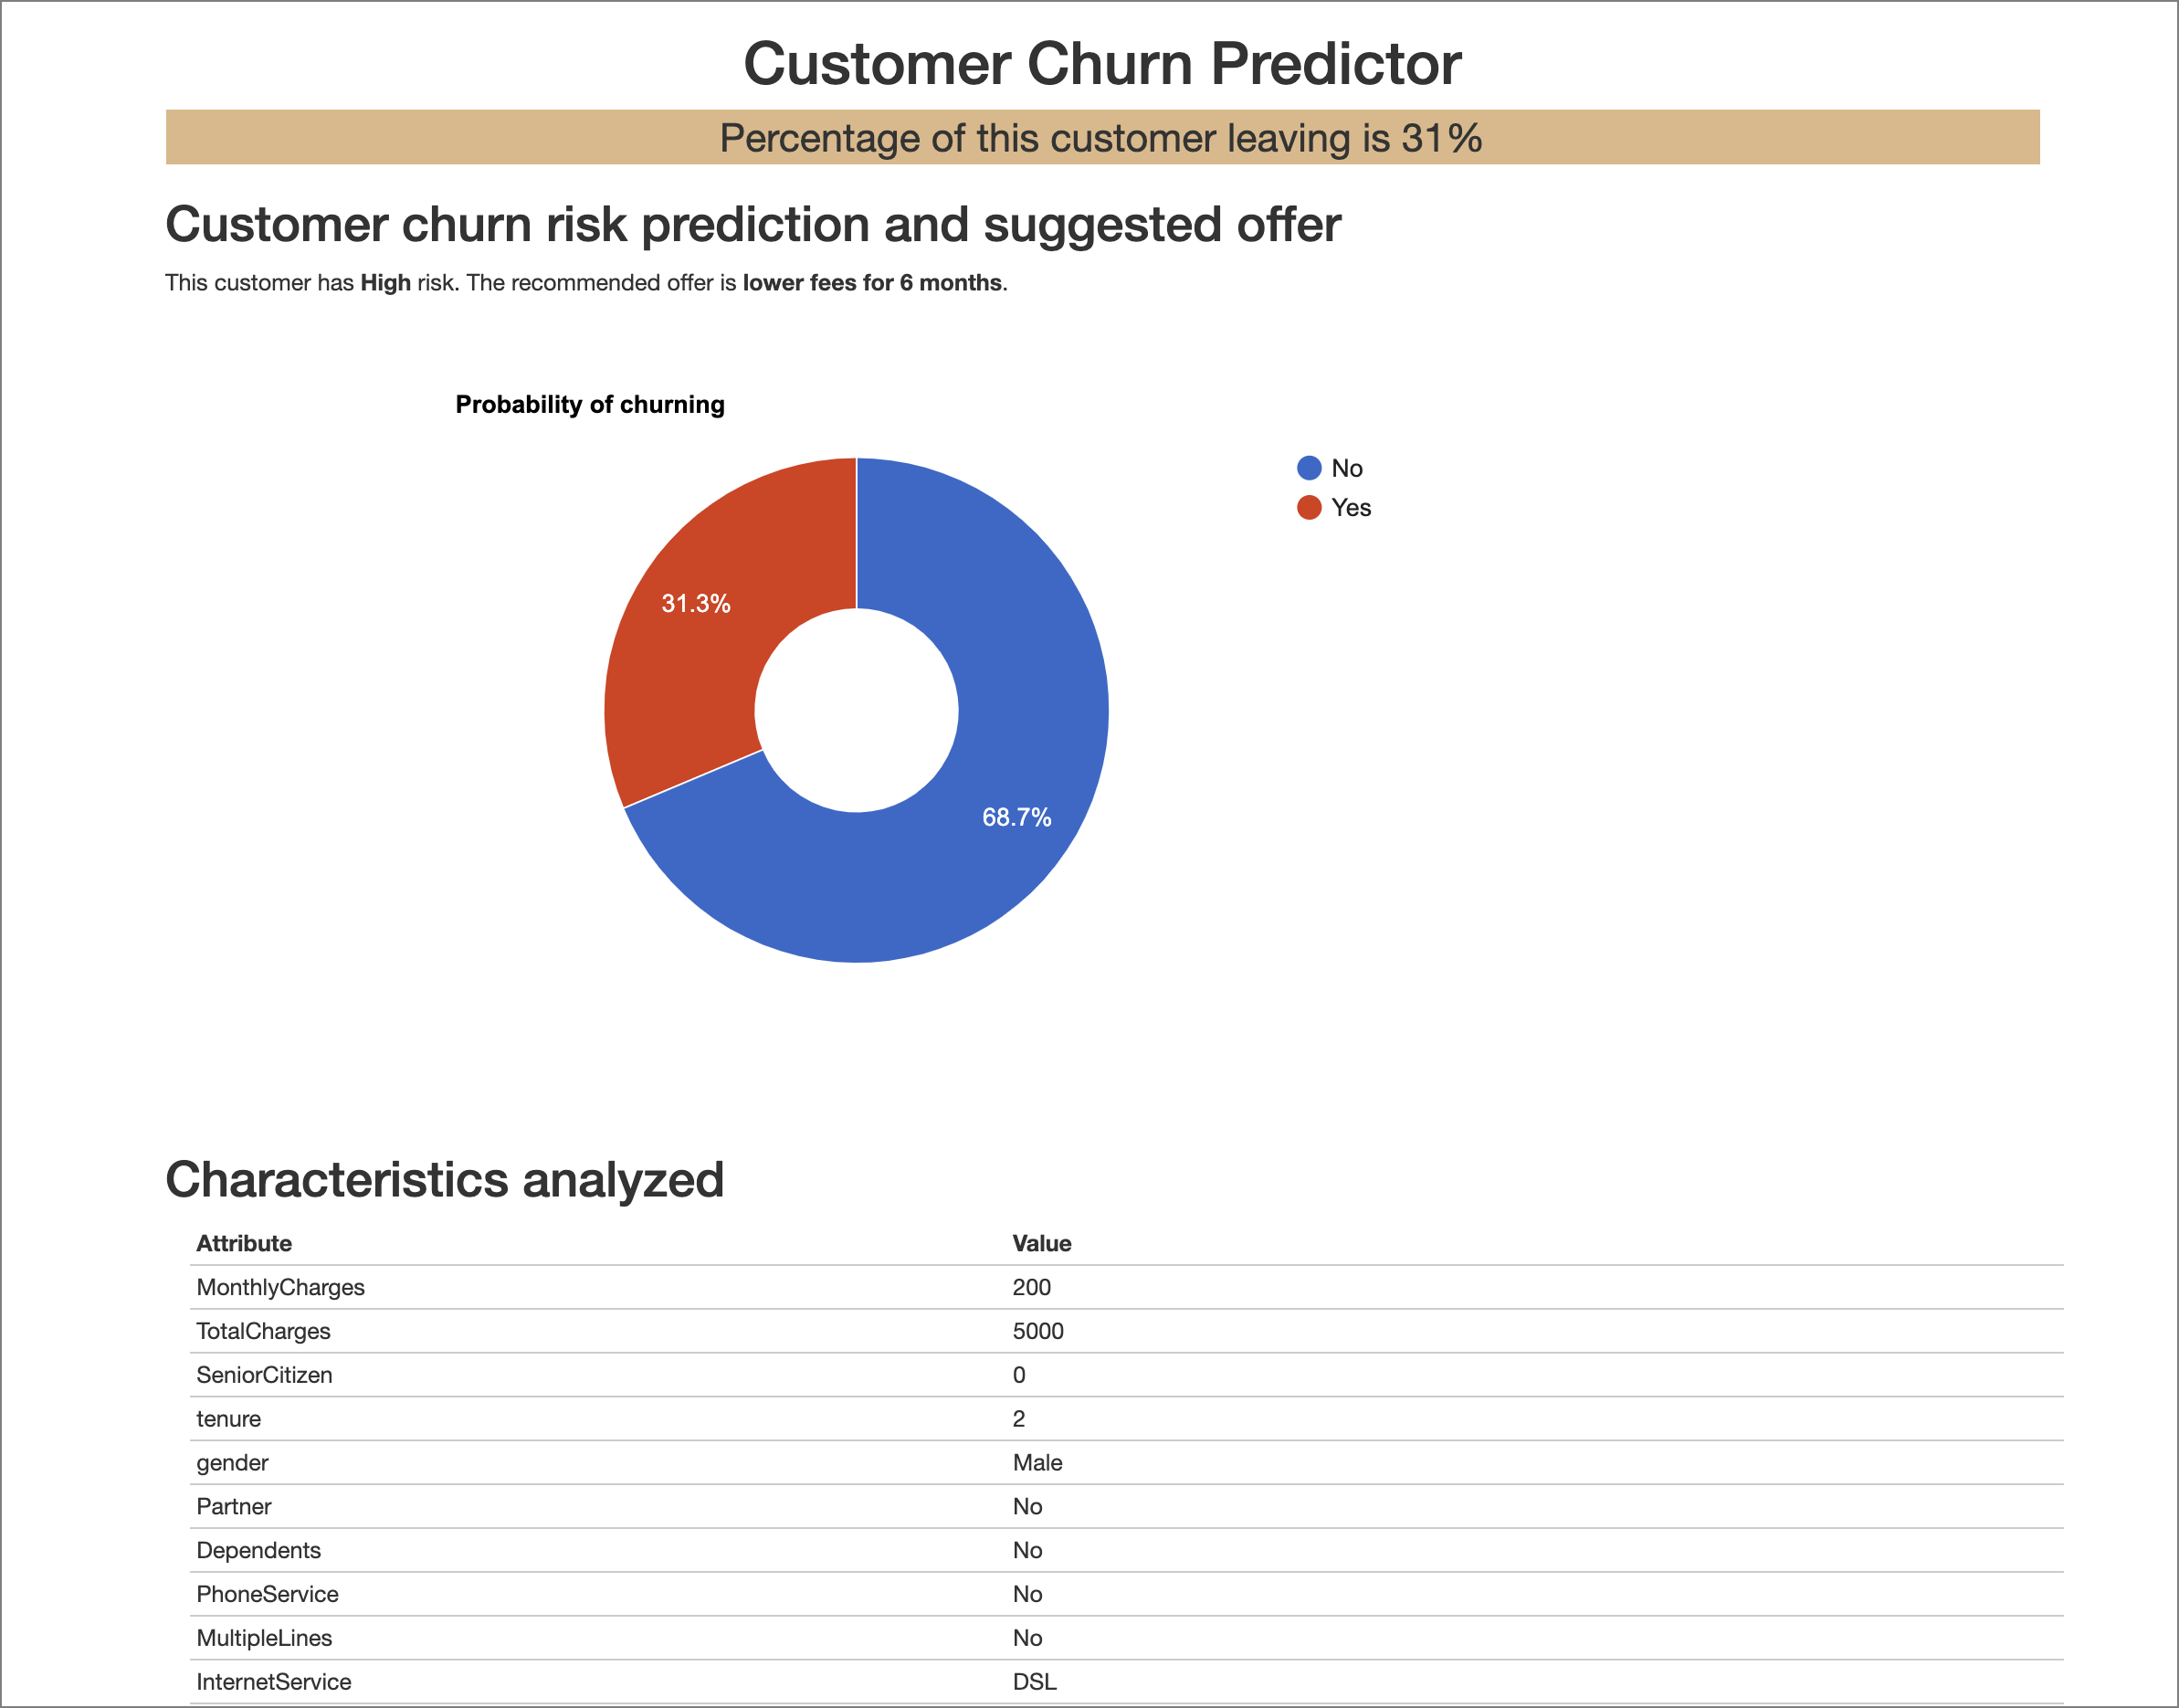 Get the churn percentage as a result